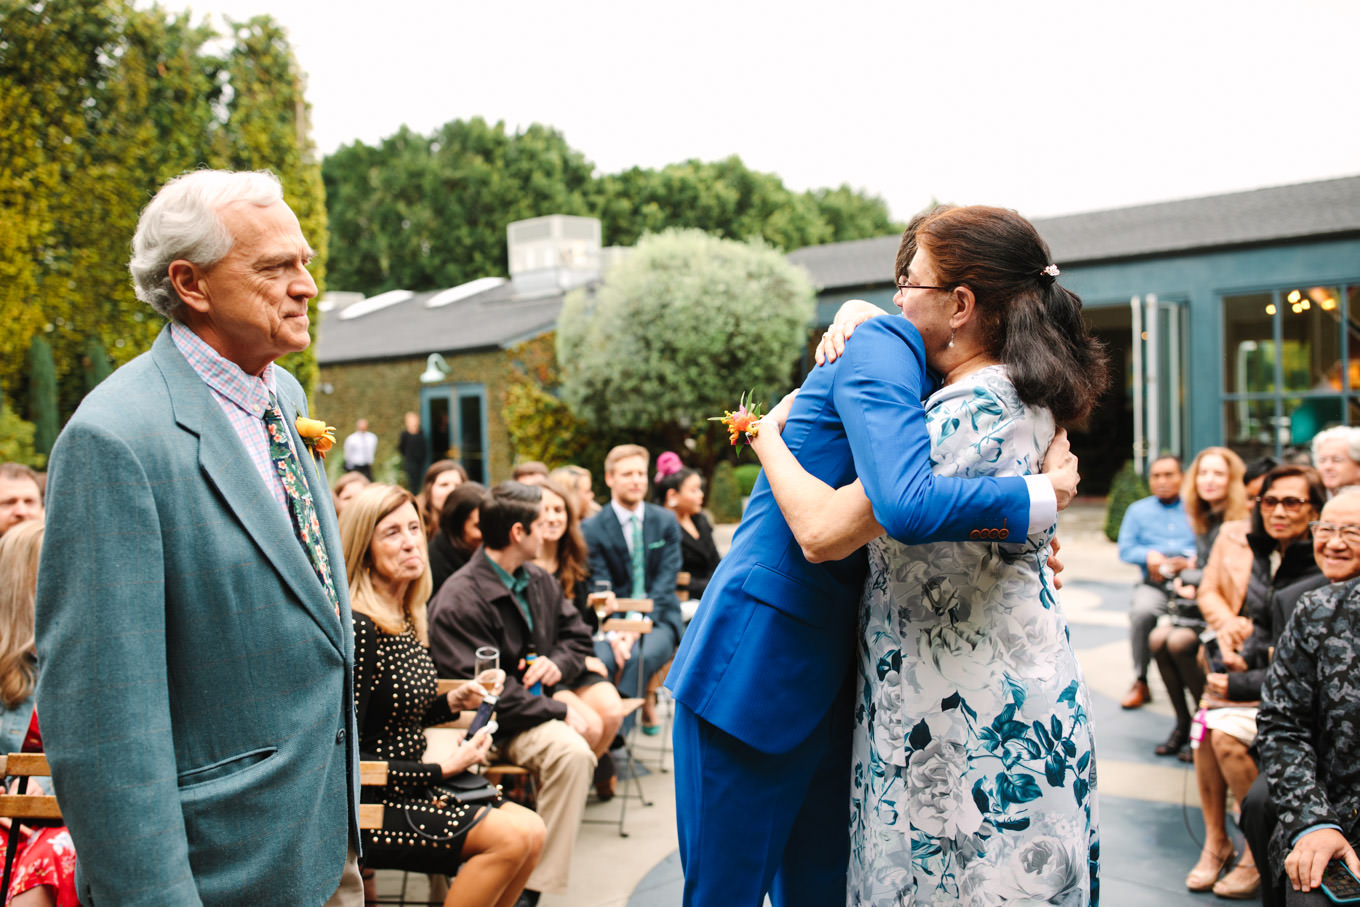 Groom hugging mom at wedding ceremony | TV inspired wedding at The Fig House Los Angeles | Published on The Knot | Fresh and colorful photography for fun-loving couples in Southern California | #losangeleswedding #TVwedding #colorfulwedding #theknot   Source: Mary Costa Photography | Los Angeles wedding photographer